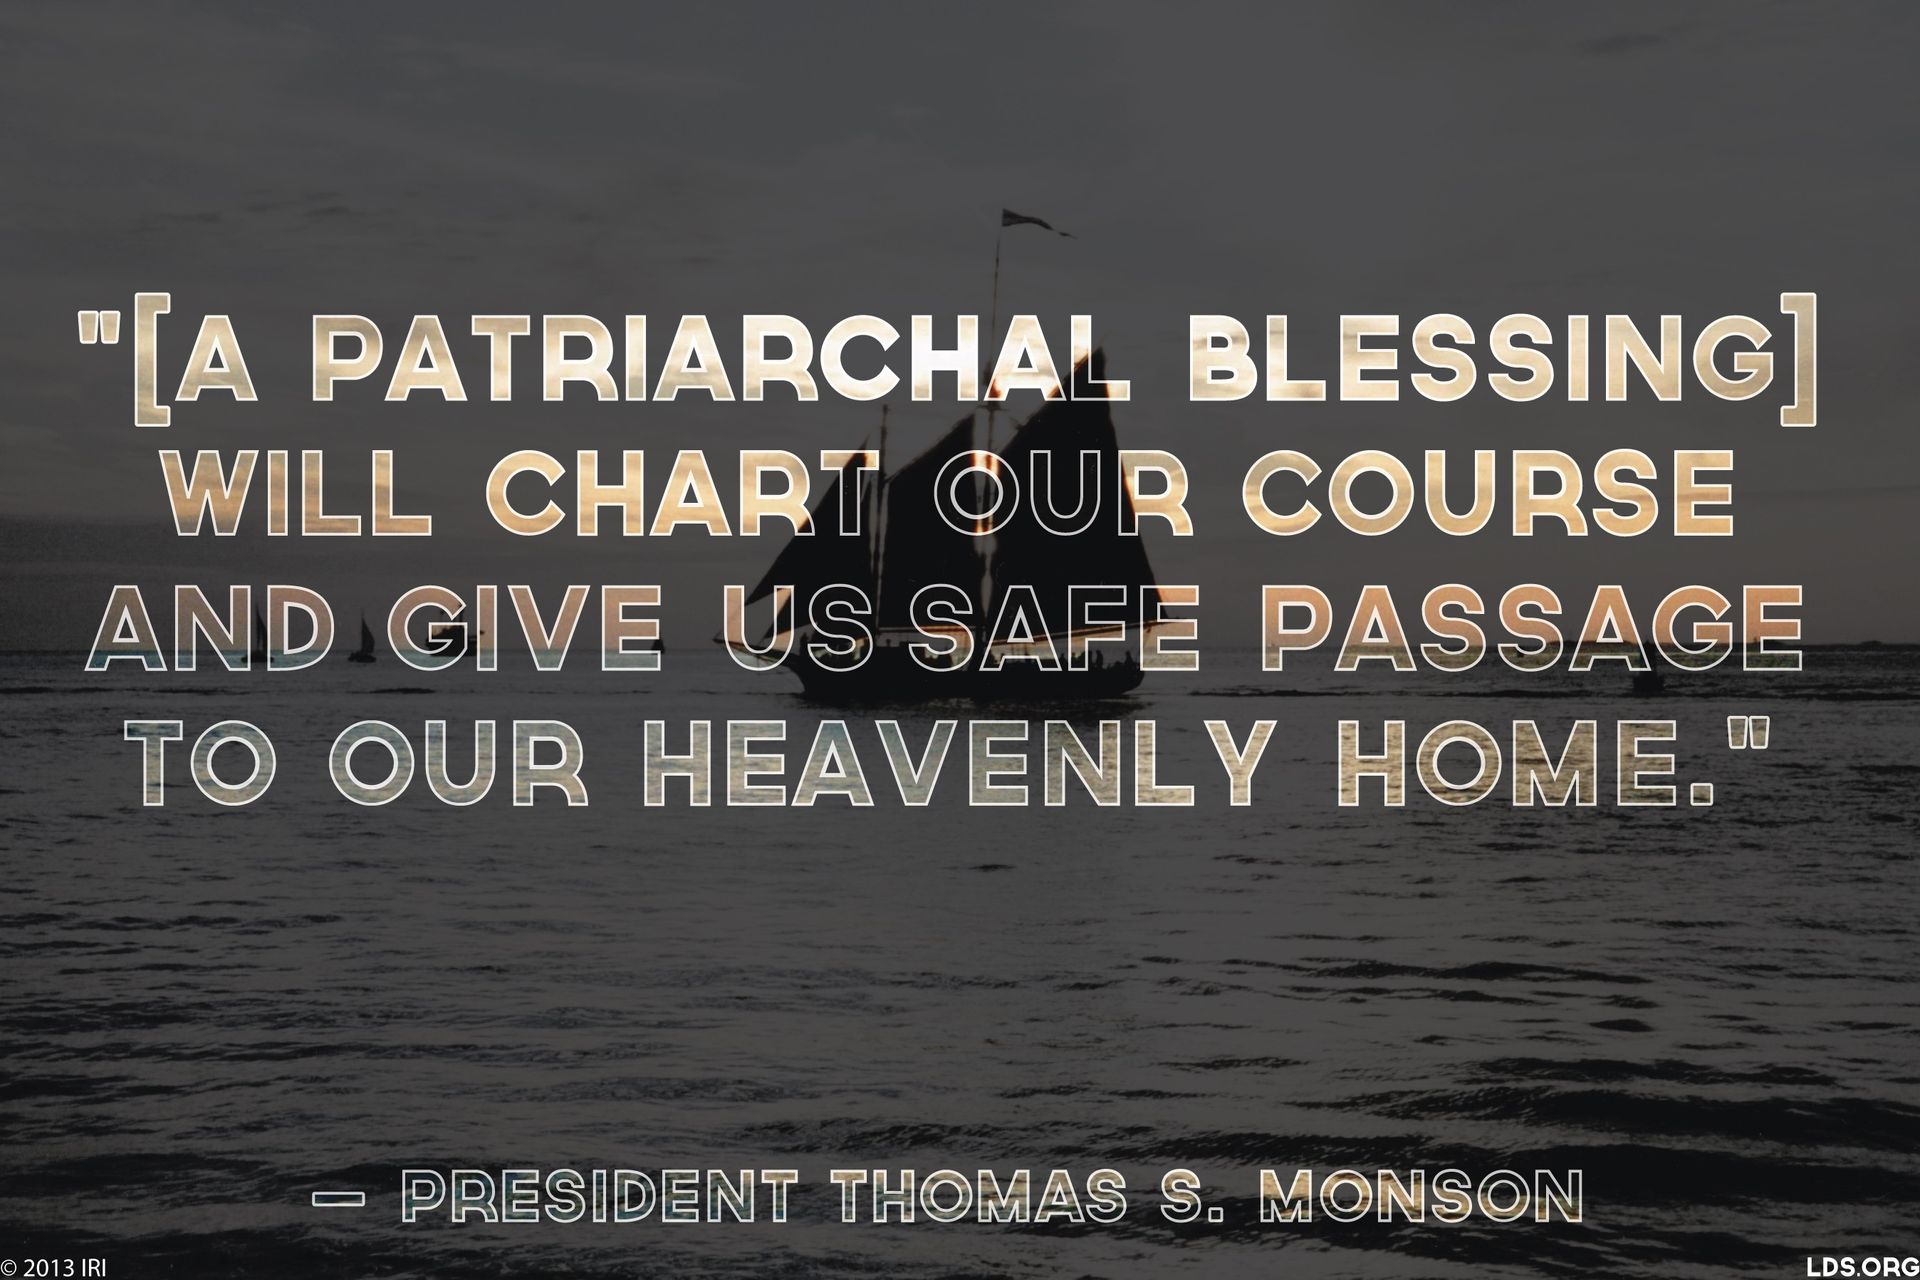 “[A patriarchal blessing] will chart our course and give us safe passage to our heavenly home.”—President Thomas S. Monson, “Your Patriarchal Blessing: A Liahona of Light” © undefined ipCode 1.